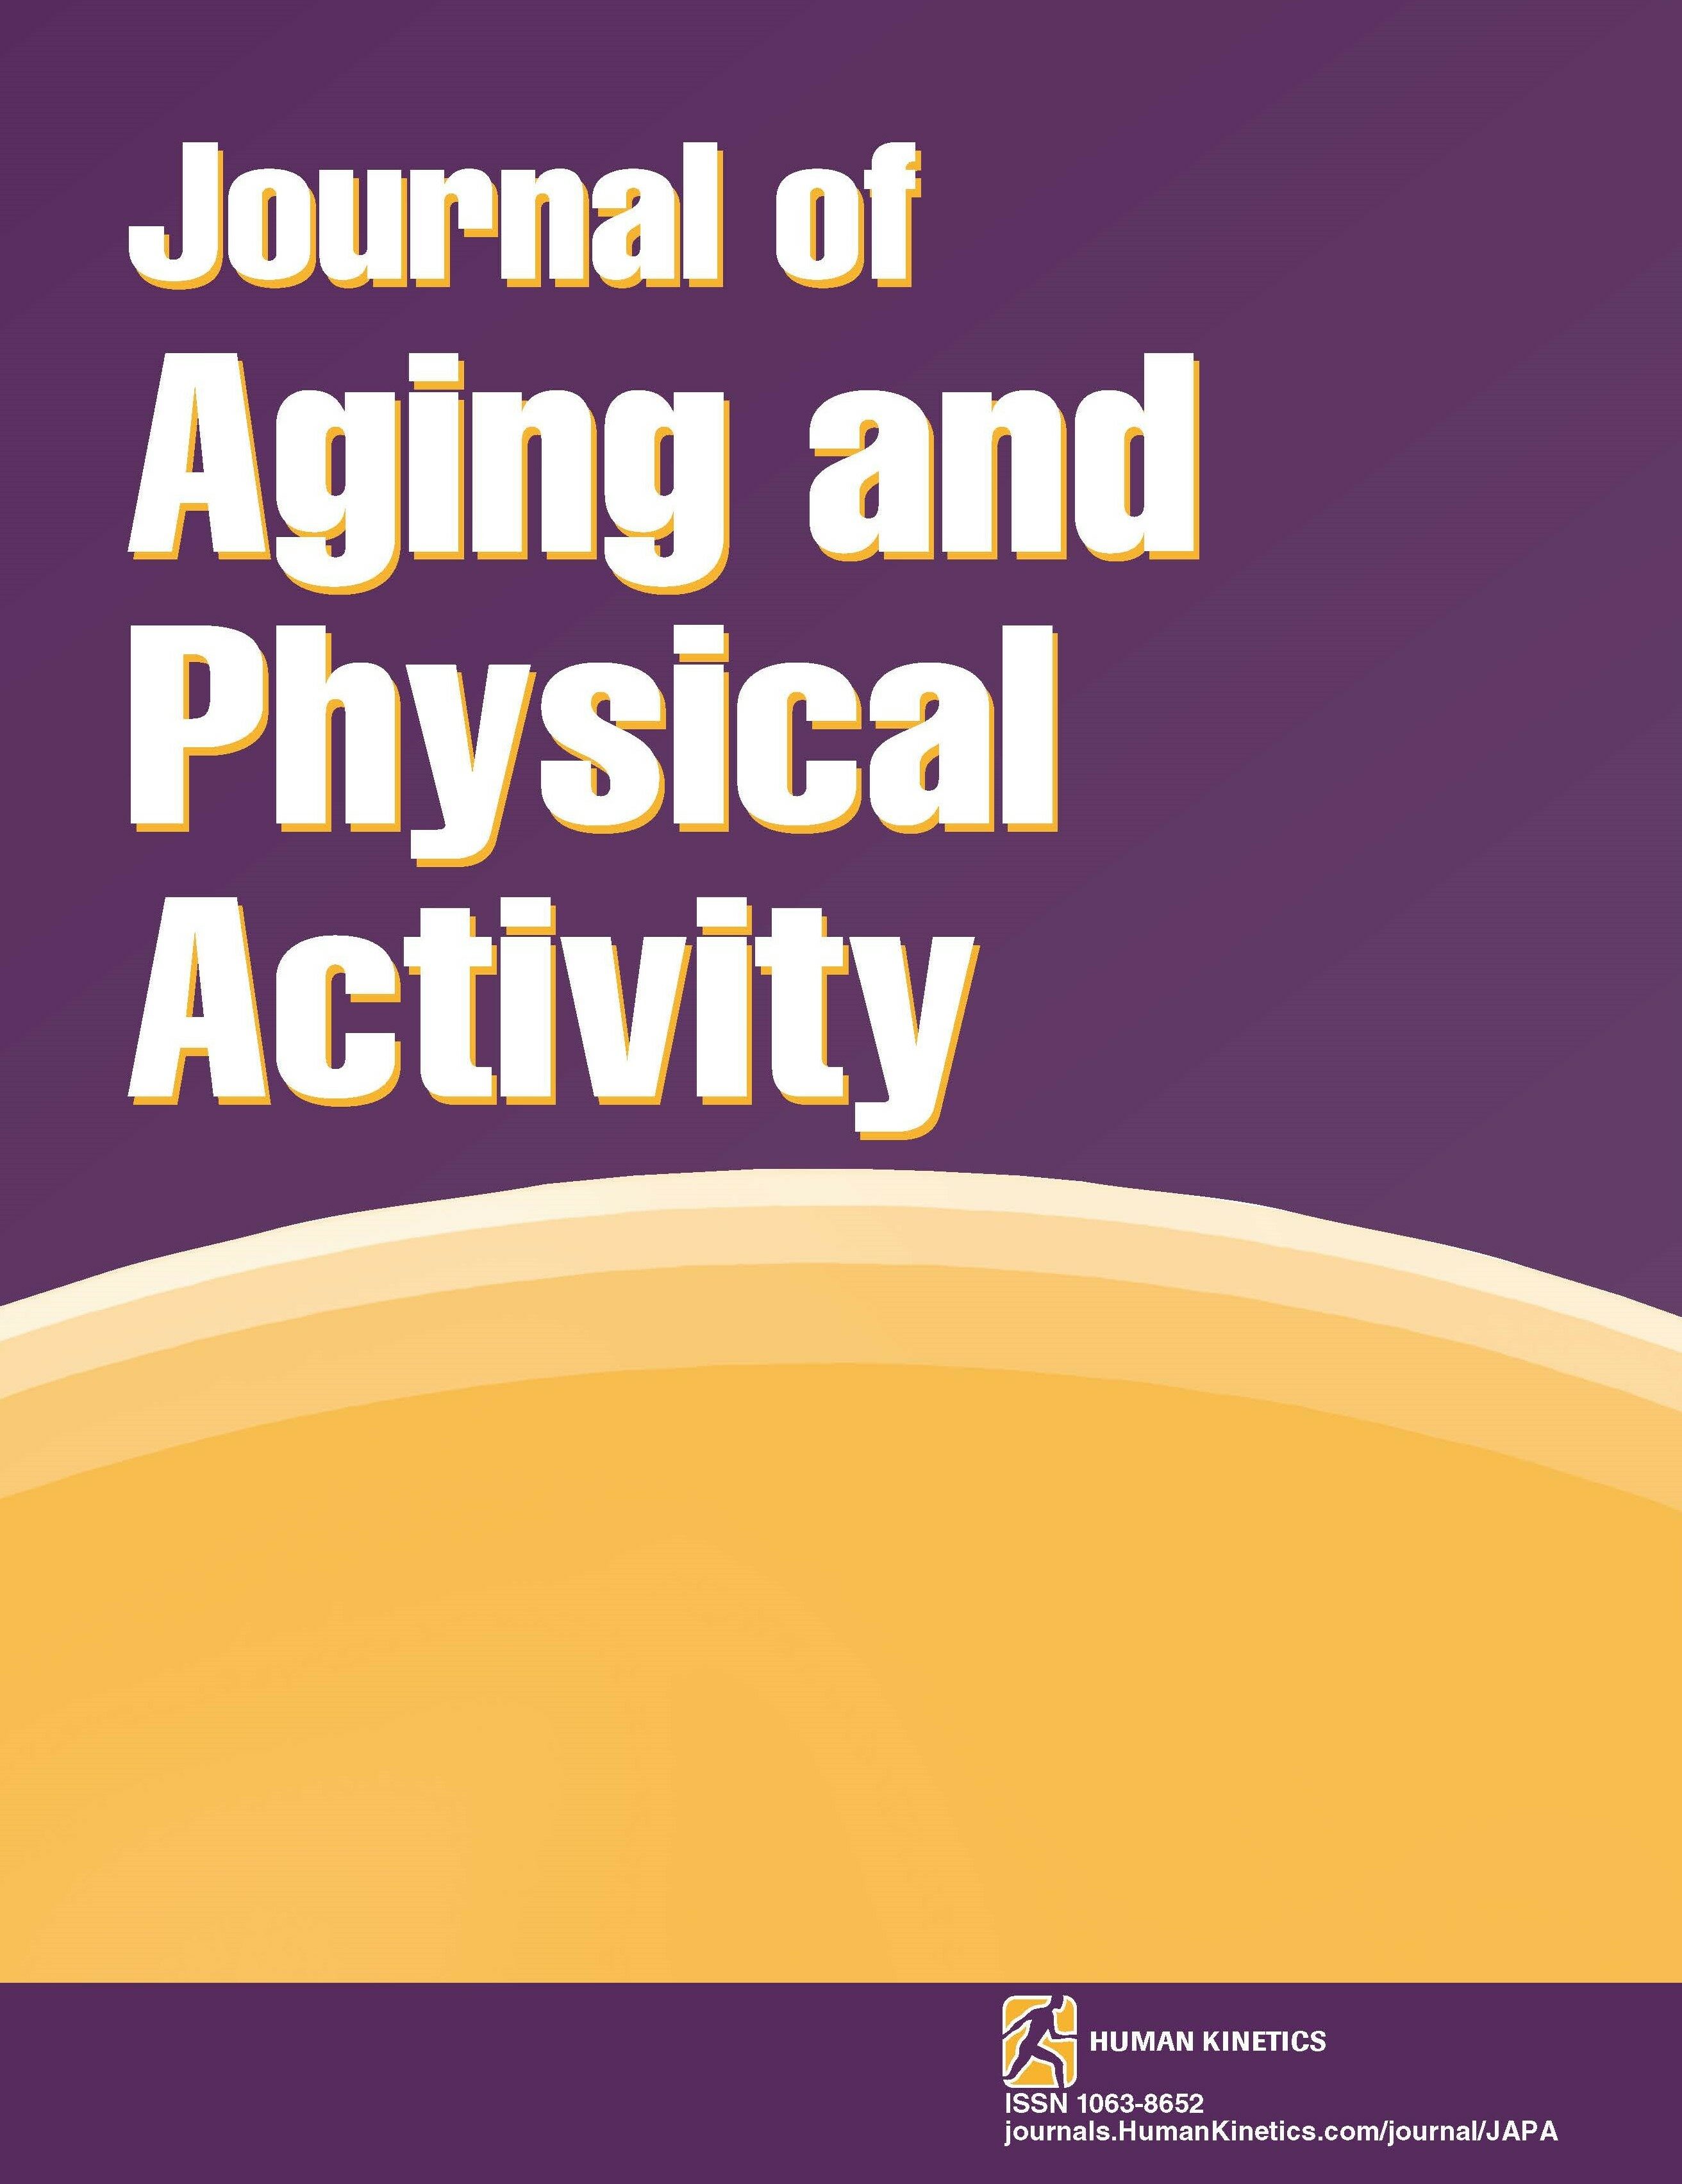 Identifying Ageism Within Australian Local Government Physical Activity Policy: A Critical Discourse Analysis